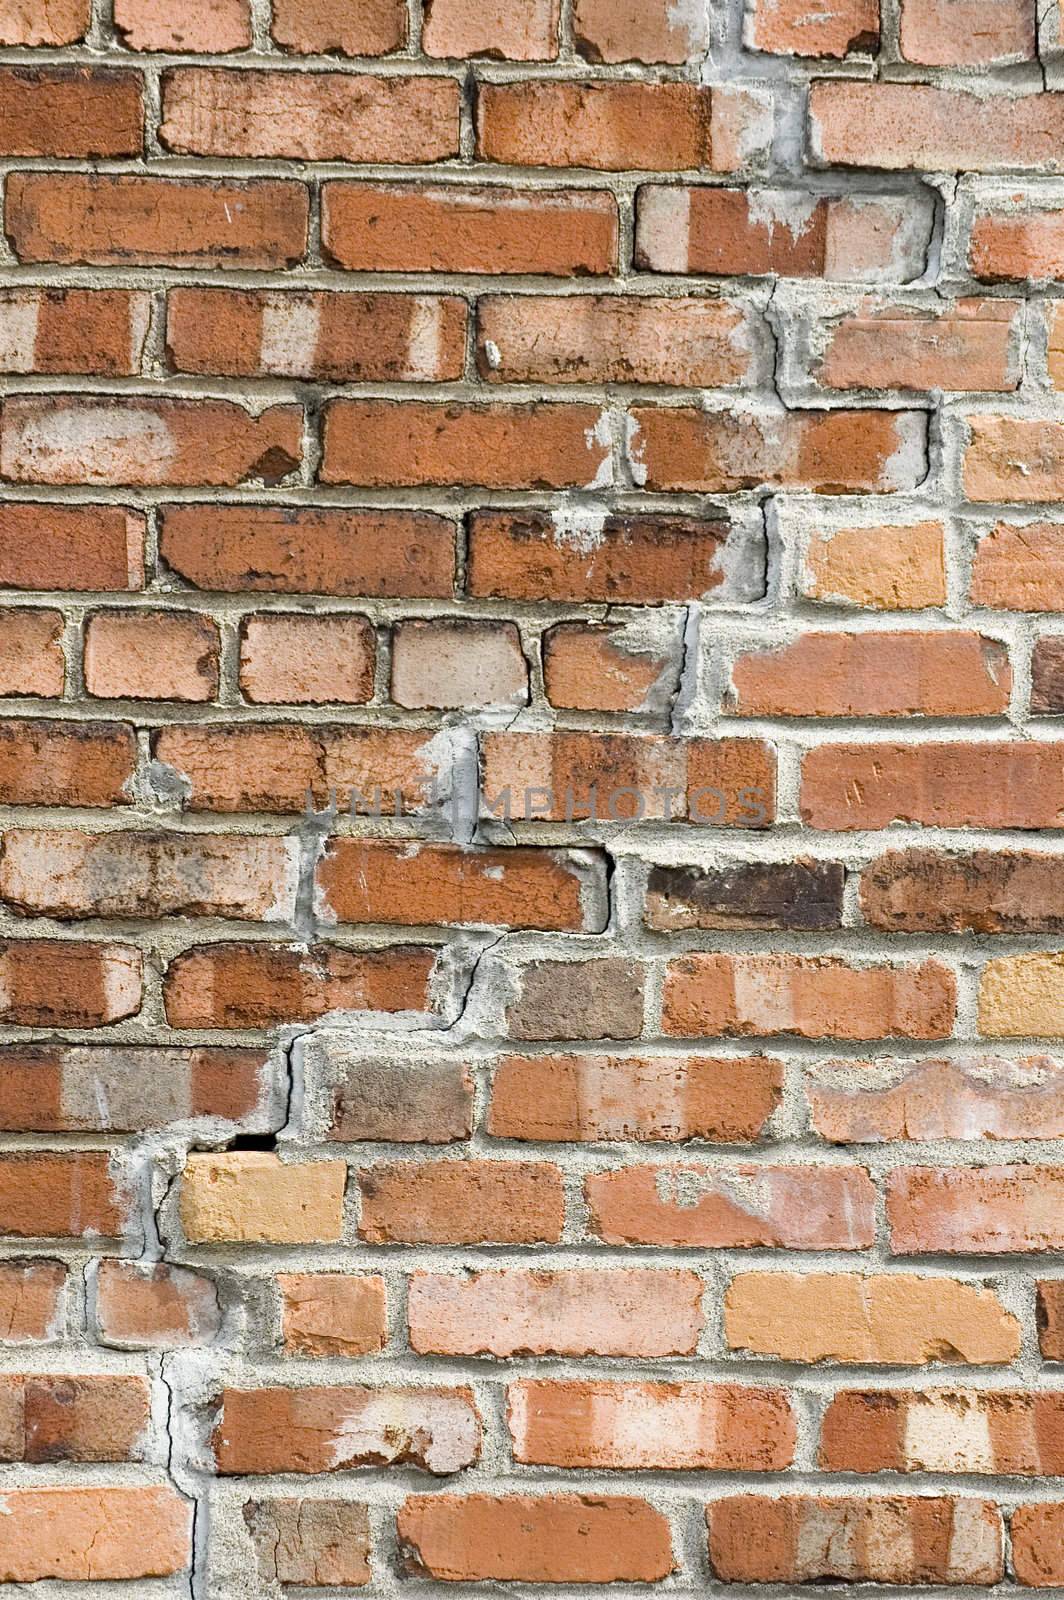 a close up view of a cracked brick wall